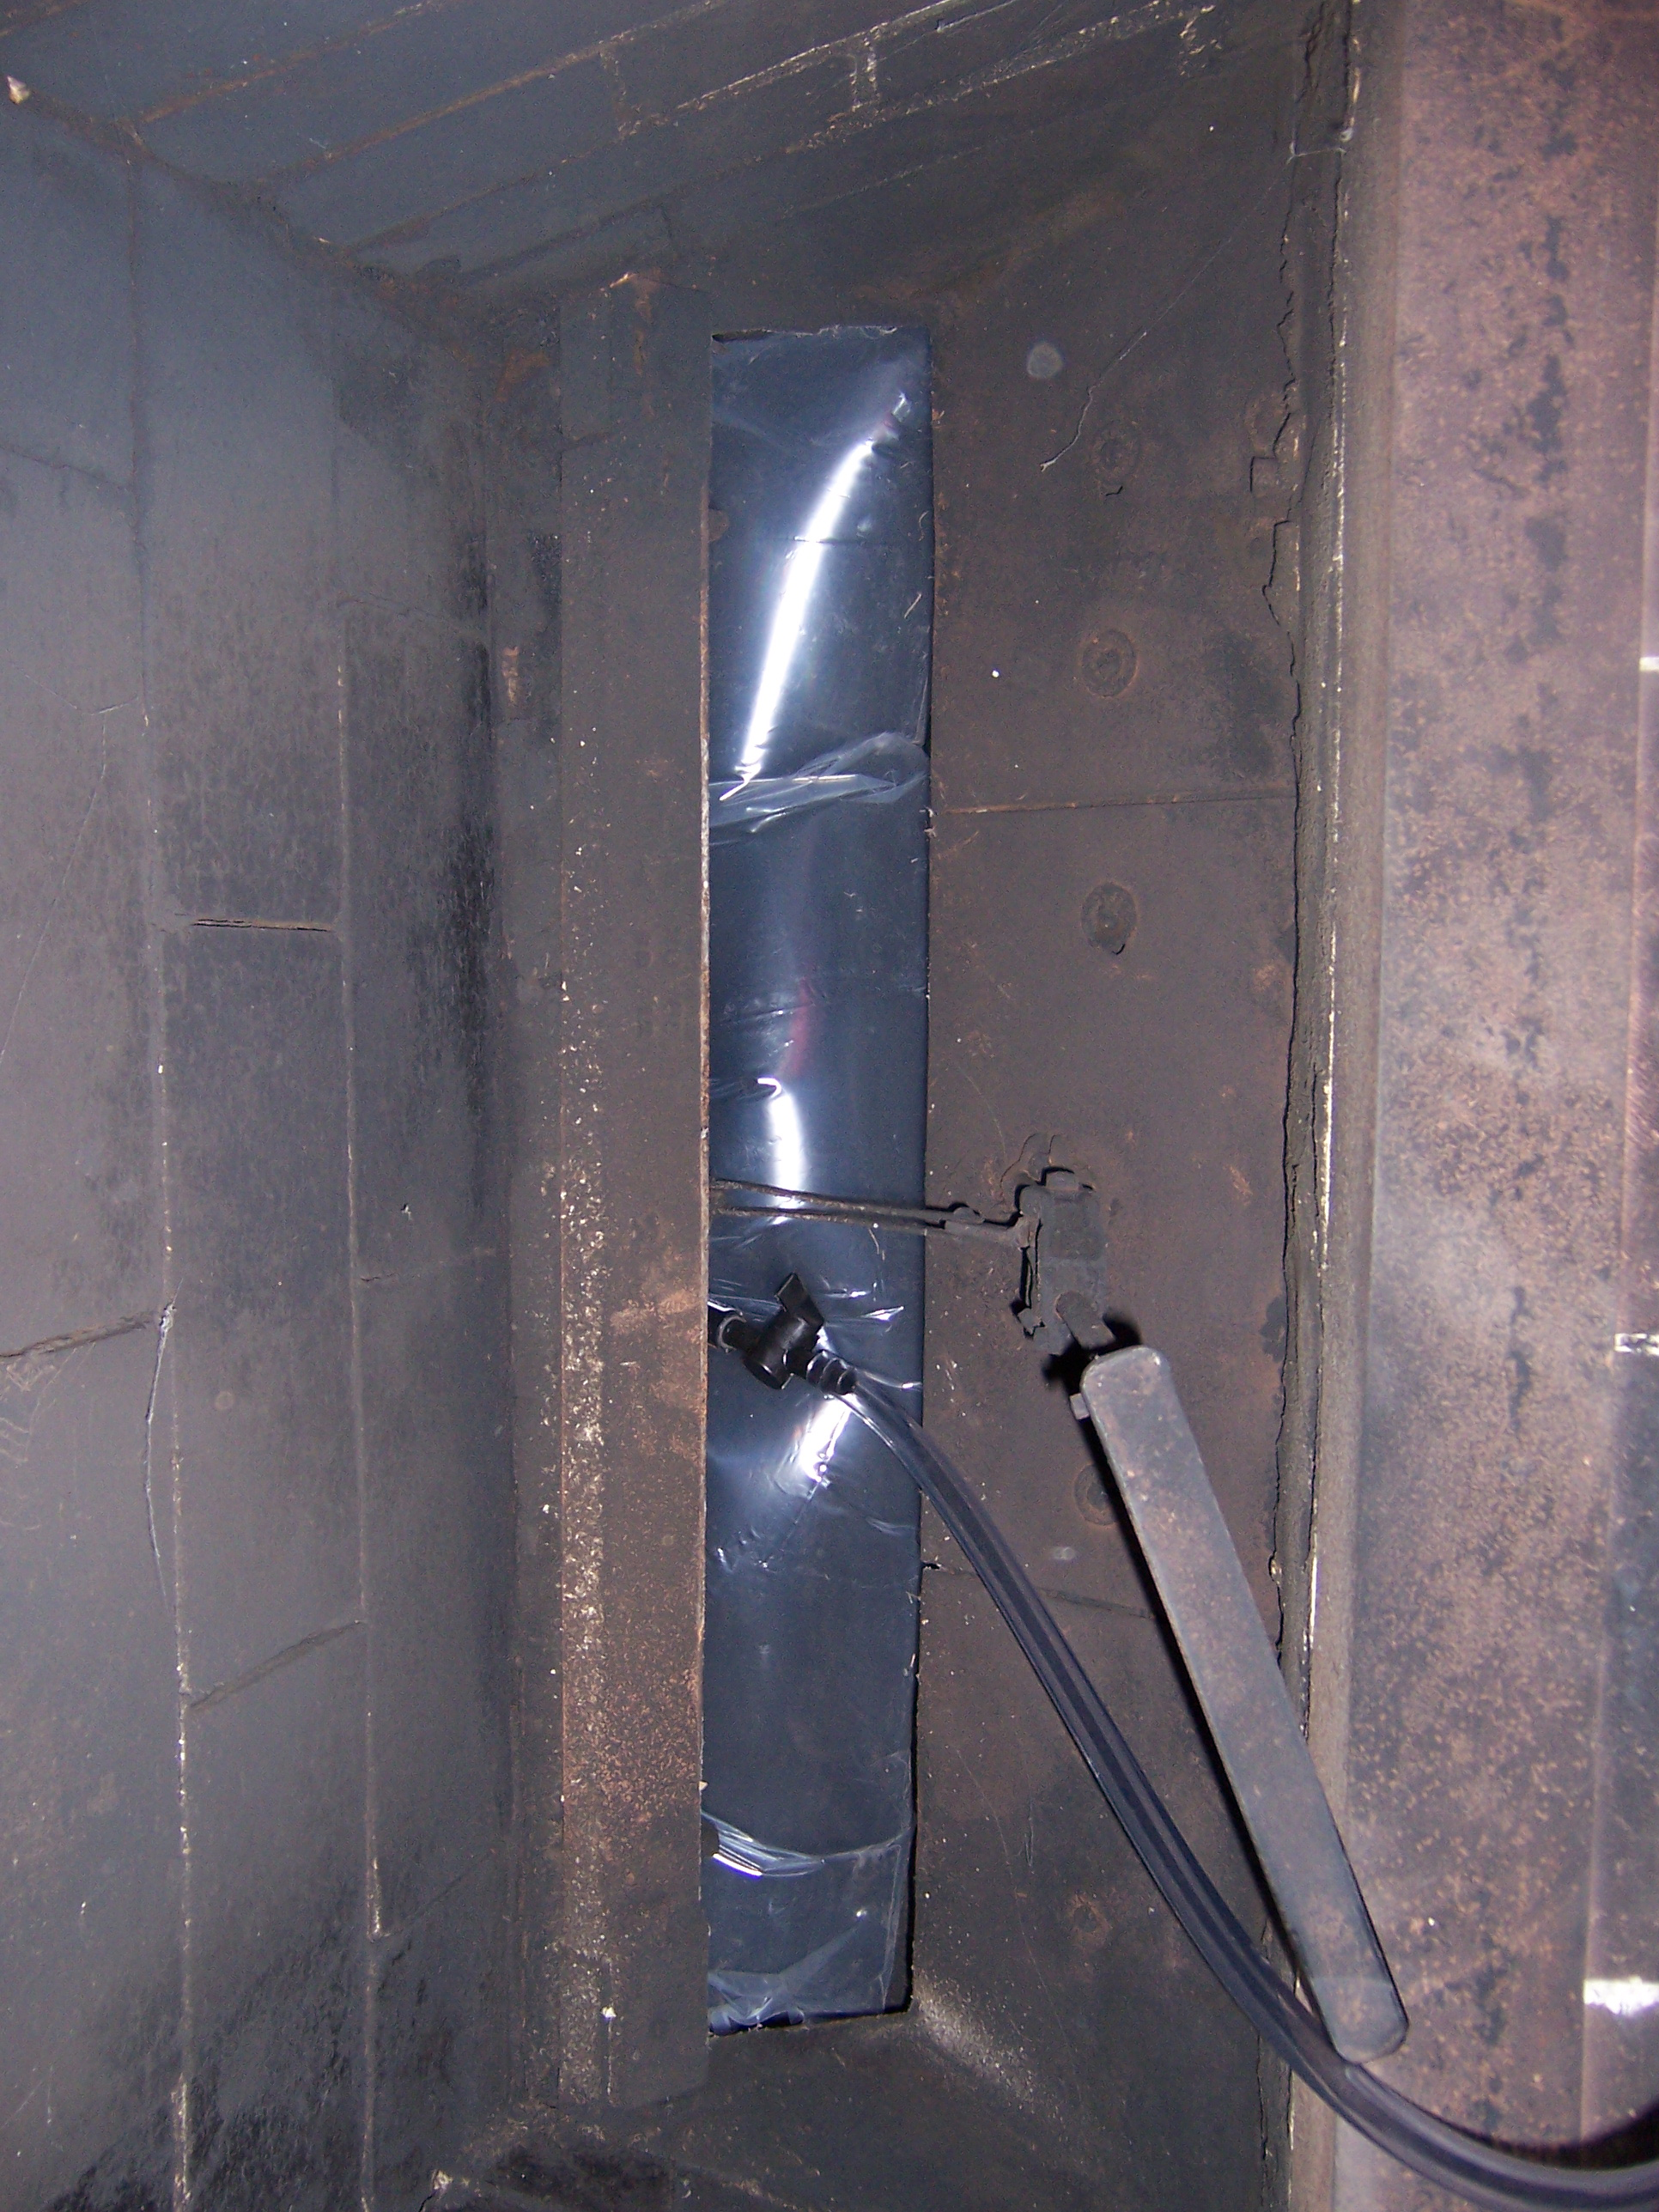 Do I close the damper after installing the Chimney Balloon?